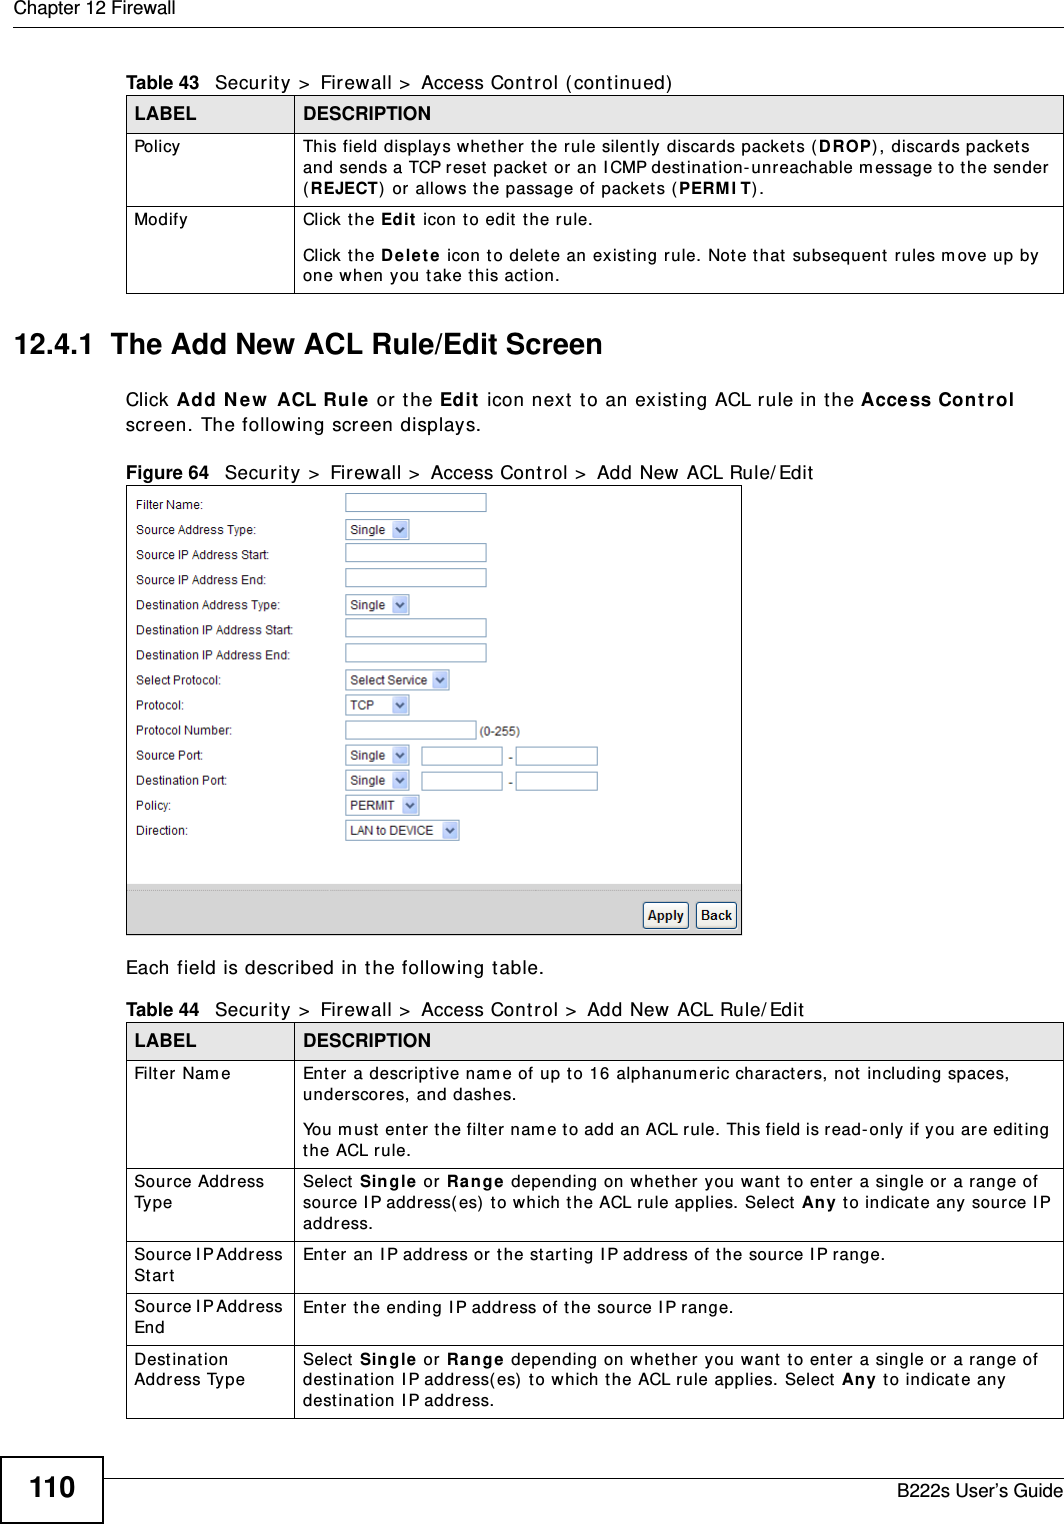 Chapter 12 FirewallB222s User’s Guide11012.4.1  The Add New ACL Rule/Edit ScreenClick Add N ew  ACL Ru le or t he Edit  icon next  t o an existing ACL rule in t he Acce ss Cont rol screen. The following screen displays.Figure 64   Secur it y &gt;  Firewall &gt;  Access Cont rol &gt;  Add New ACL Rule/ EditEach field is described in t he following t able.Policy This field displays whether the rule silent ly discards packet s ( D ROP), discards packet s and sends a TCP reset packet or an I CMP dest inat ion- unreachable m essage t o t he sender (REJECT)  or allows t he passage of packets ( PERM I T) .Modify Click the Ed it  icon to edit  t he rule.Click t he D e le t e icon to delet e an existing rule. Note that  subsequent  rules m ove up by one when y ou t ake this action.Table 43   Security &gt;  Firewall &gt;  Access Control (continued)LABEL DESCRIPTIONTable 44   Security &gt;  Firewall &gt;  Access Control &gt;  Add New ACL Rule/ EditLABEL DESCRIPTIONFilt er Nam e Ent er a descr ipt ive nam e of up t o 16 alphanum eric charact ers, not including spaces, underscores, and dashes. You m ust enter t he filt er nam e t o add an ACL r ule. This field is read- only if you are editing the ACL rule.Source Addr ess Ty p eSelect  Single or Ra nge  depending on w het her you want  to ent er a single or a range of source I P address( es)  t o which the ACL rule applies. Select  Any t o indicate any source I P address.Sour ce I P Addr ess St artEnter an I P address or  t he st art ing I P address of t he source I P range.Sour ce I P Addr ess EndEnter t he ending I P address of t he source I P range.Dest inat ion Address TypeSelect  Single or Ra nge  depending on w het her you want  to ent er a single or a range of destinat ion I P address( es)  t o which t he ACL rule applies. Select Any t o indicat e any destinat ion I P address.